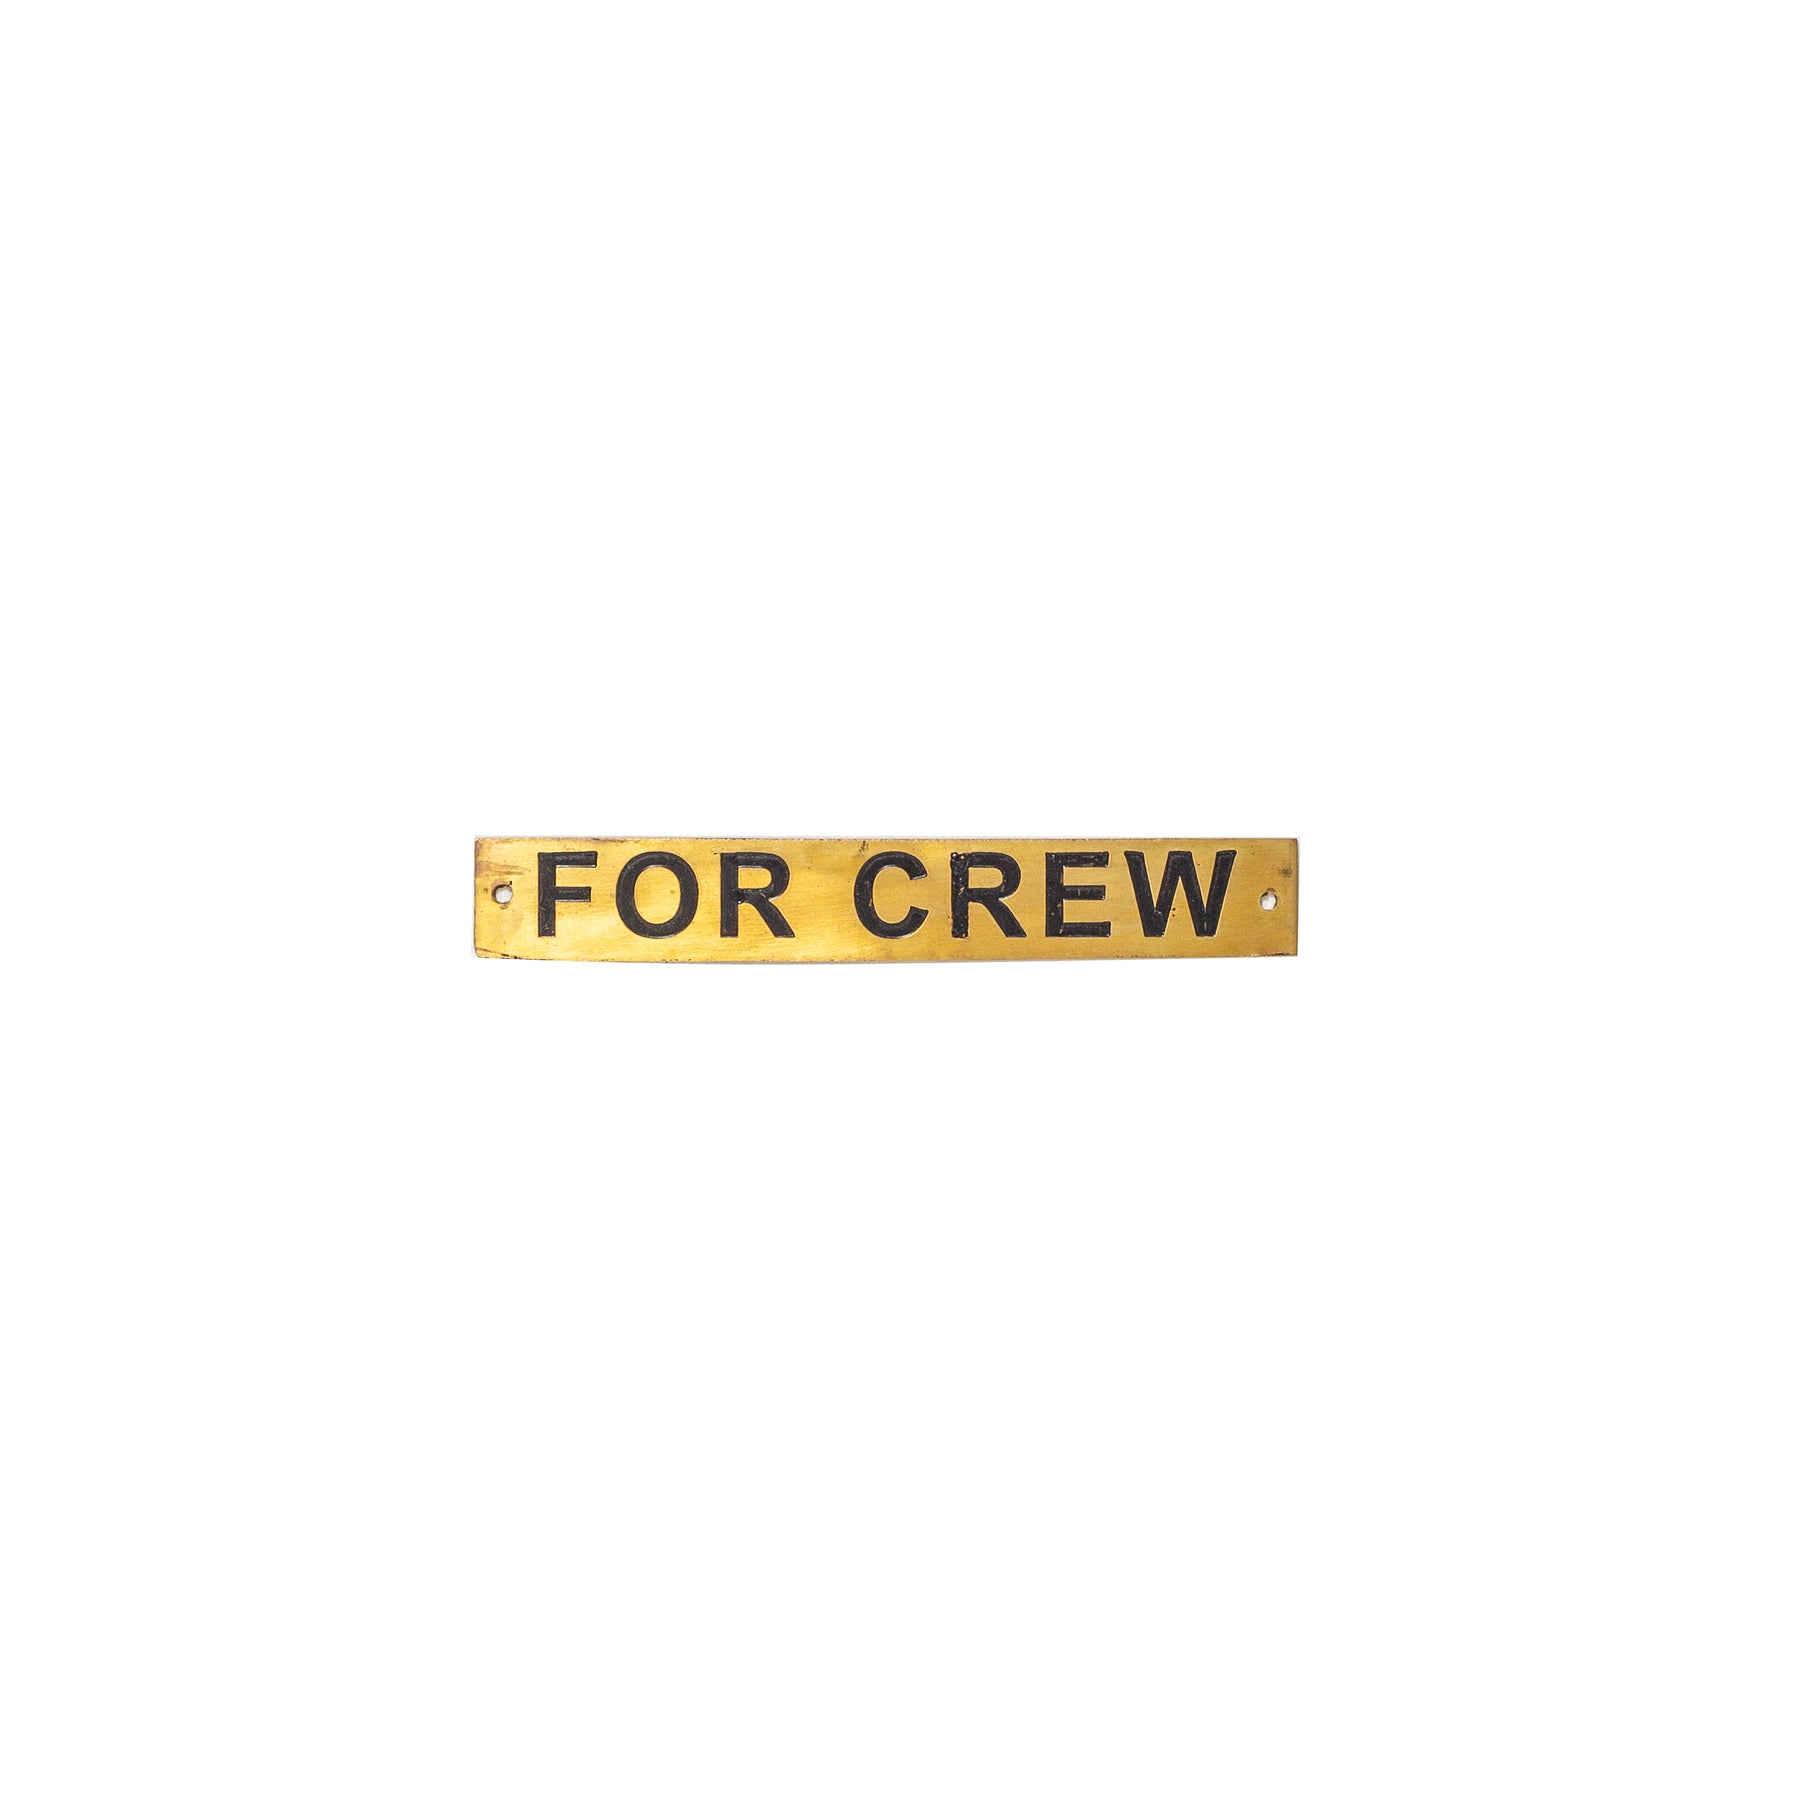 For Crew Brass Placard